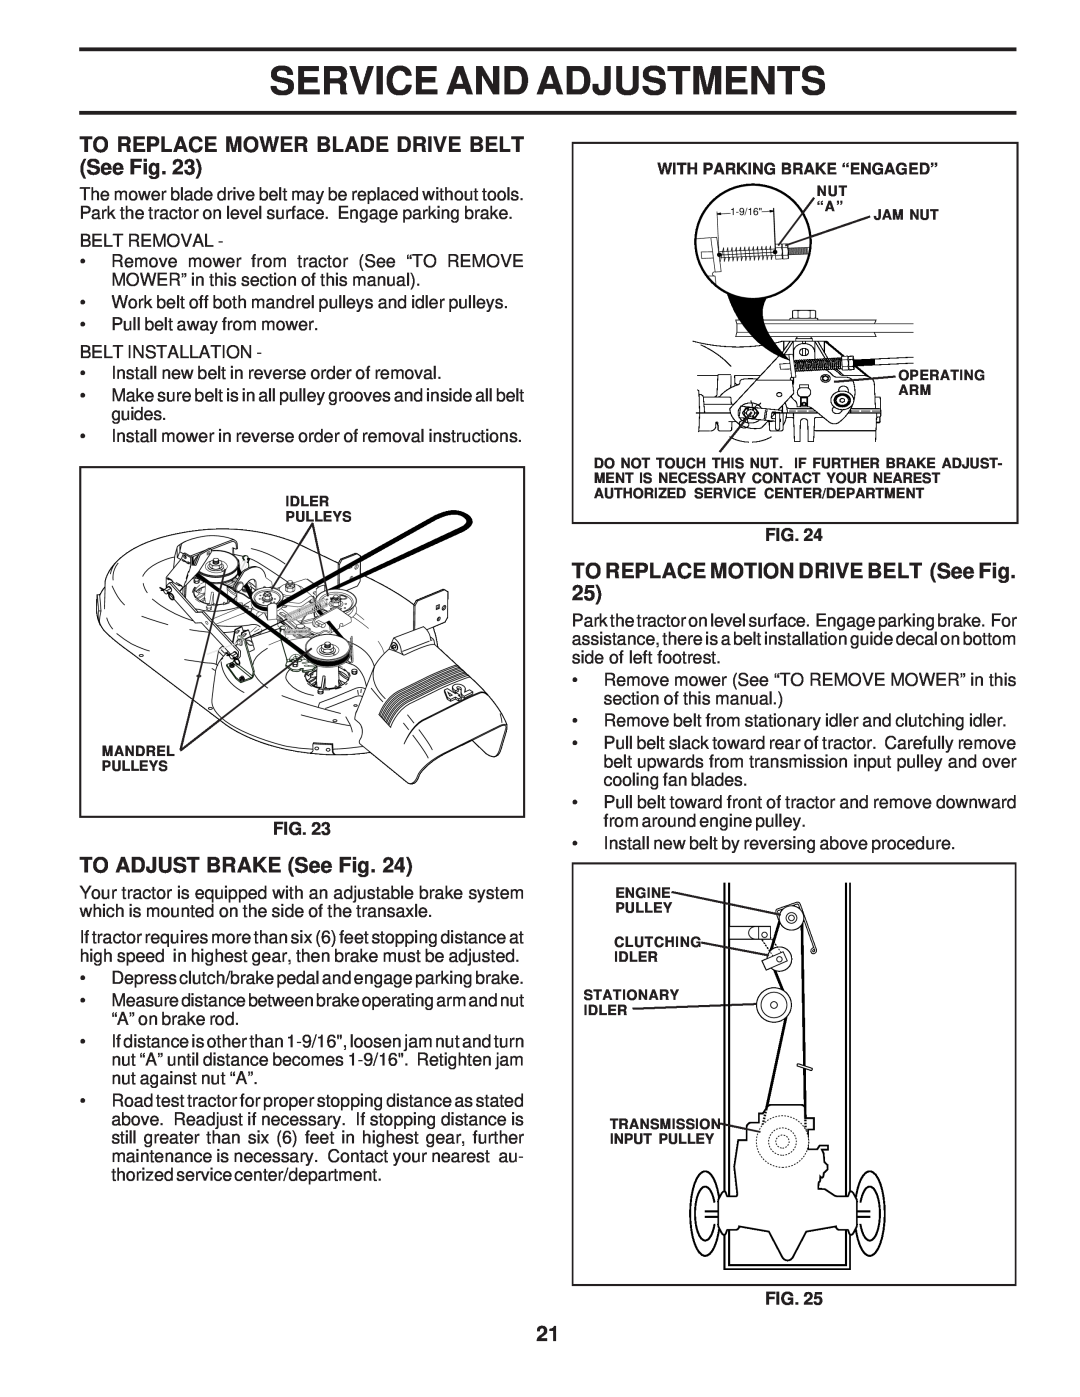 Poulan PR20H42STA TO REPLACE MOWER BLADE DRIVE BELT See Fig, TO ADJUST BRAKE See Fig, TO REPLACE MOTION DRIVE BELT See Fig 